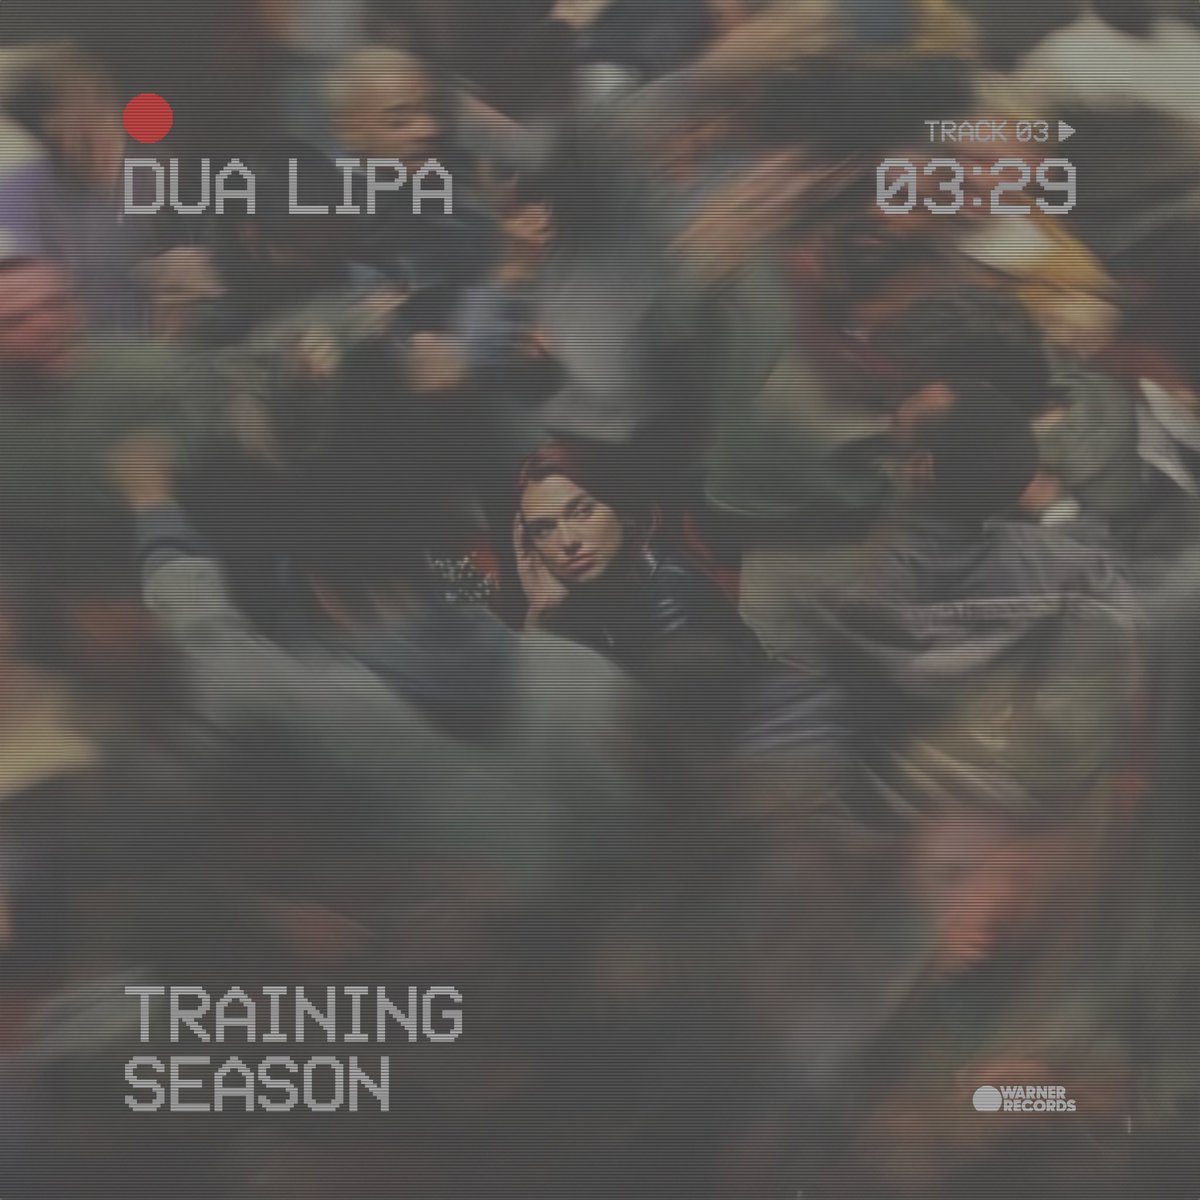 When I saw this shot I instantly wanted to design this! I'm pretty happy with the outcome 🤷‍♂️ #dualipa #trainingseason #dp3 #radicaloptimism #single #singlecover #singleartwork #artwork #design #graphics #photoshop #adobe @DUALIPA